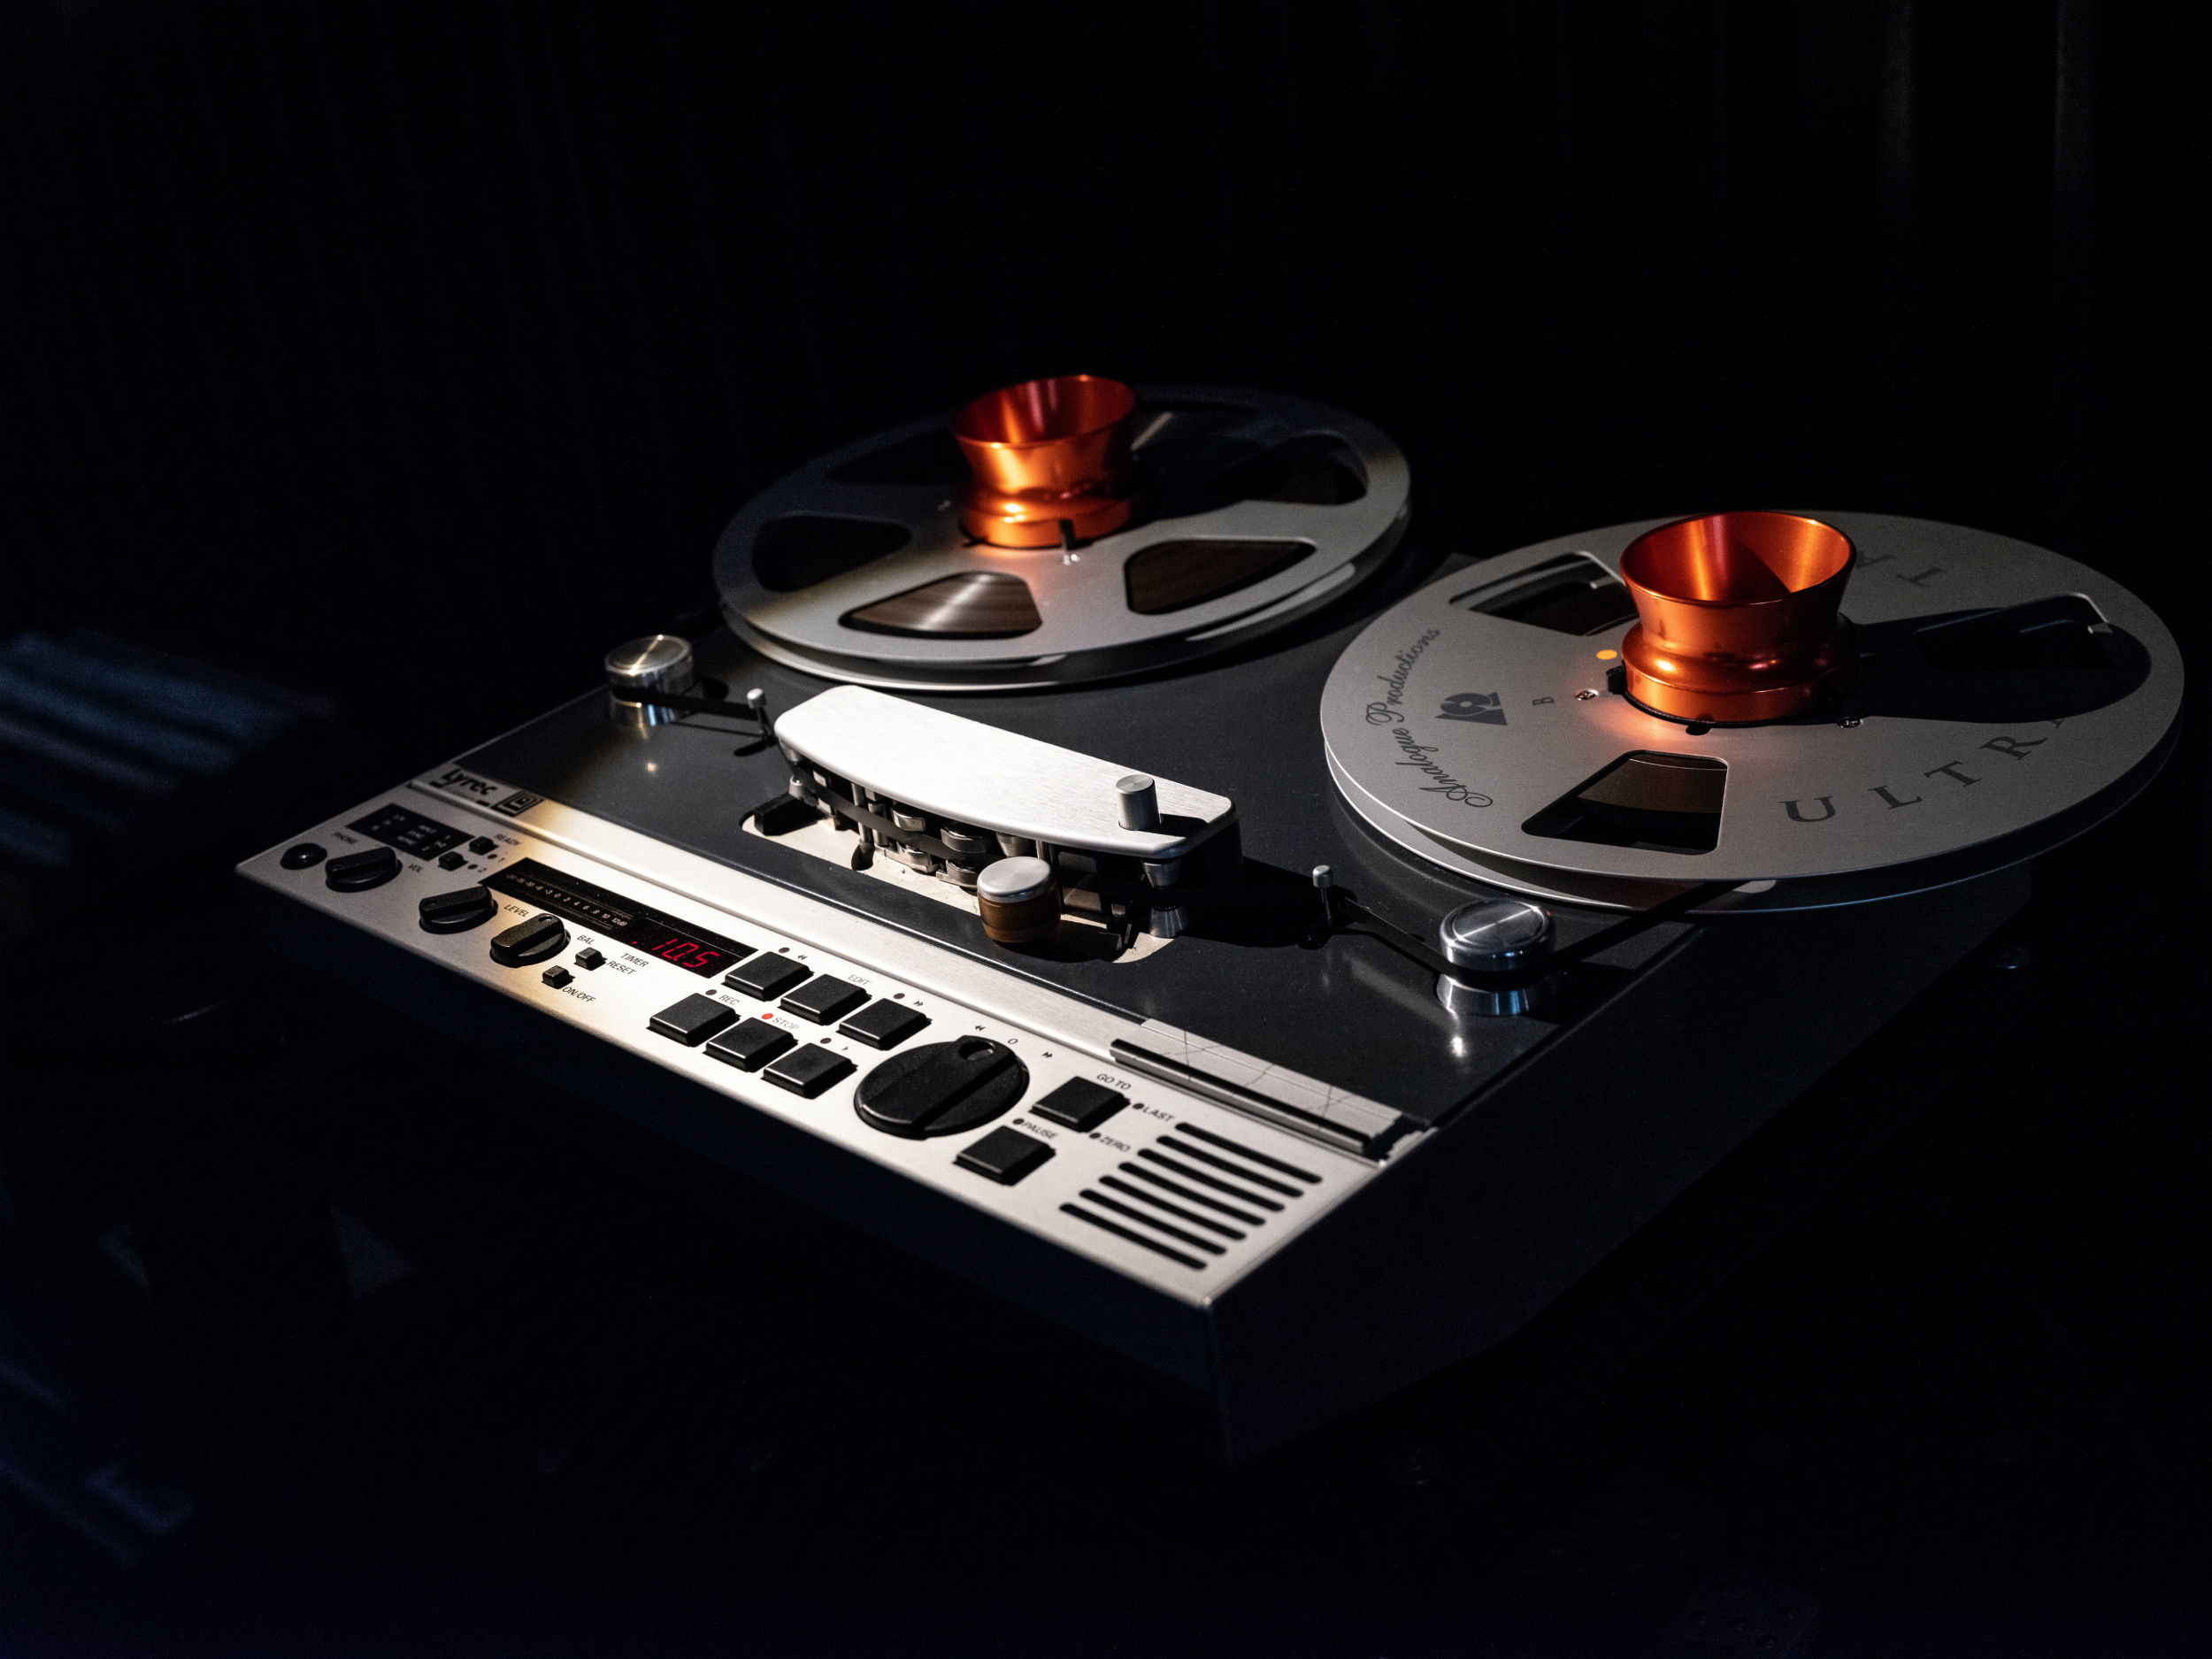 The resurgence of the reel-to-reel tape